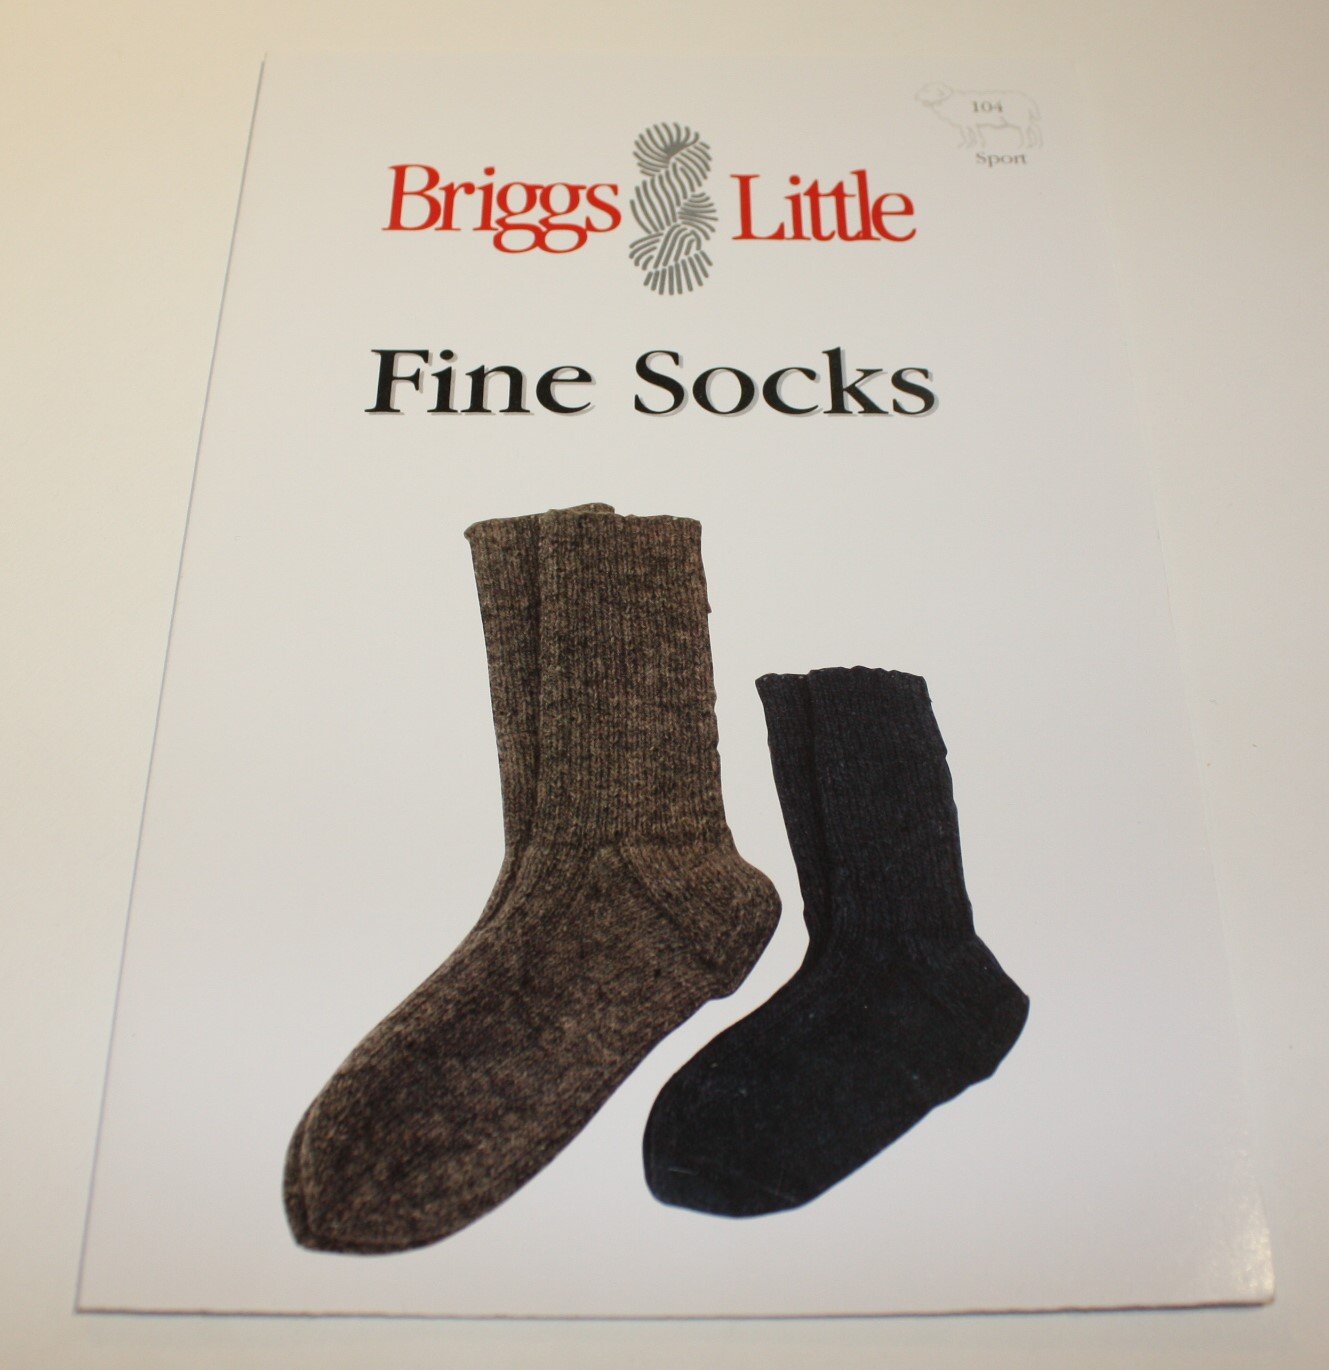 Briggs and Little Sock Patterns